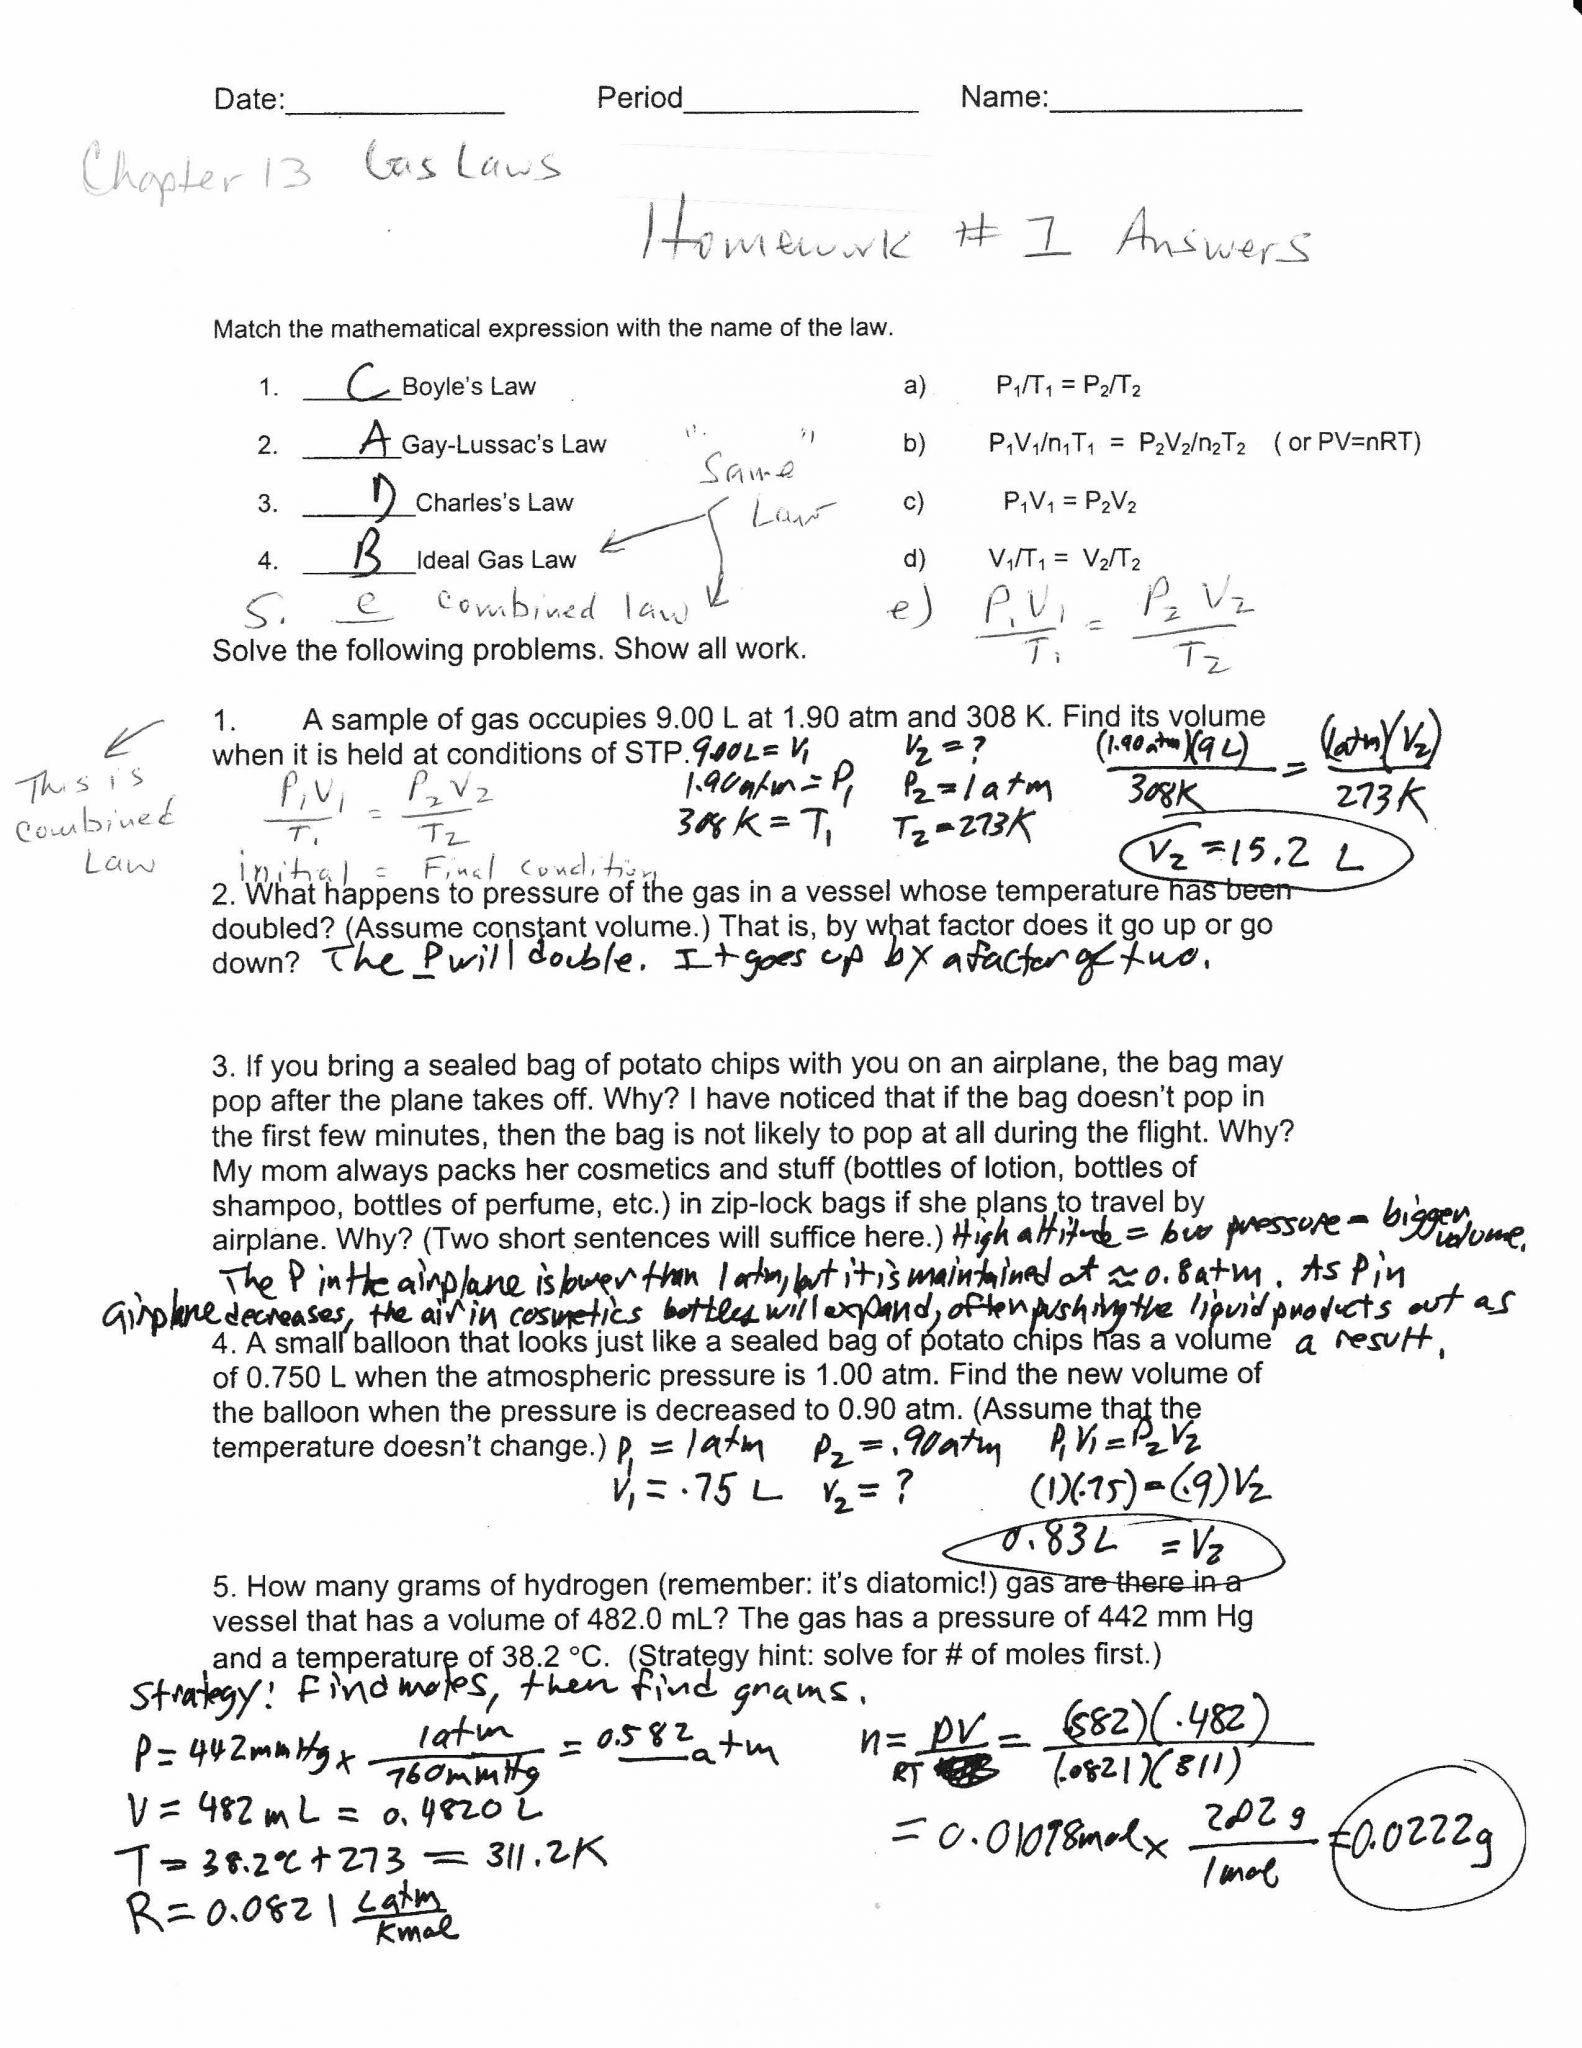 Fission Versus Fusion Worksheet Answers or Nuclear Chemistry Worksheet K